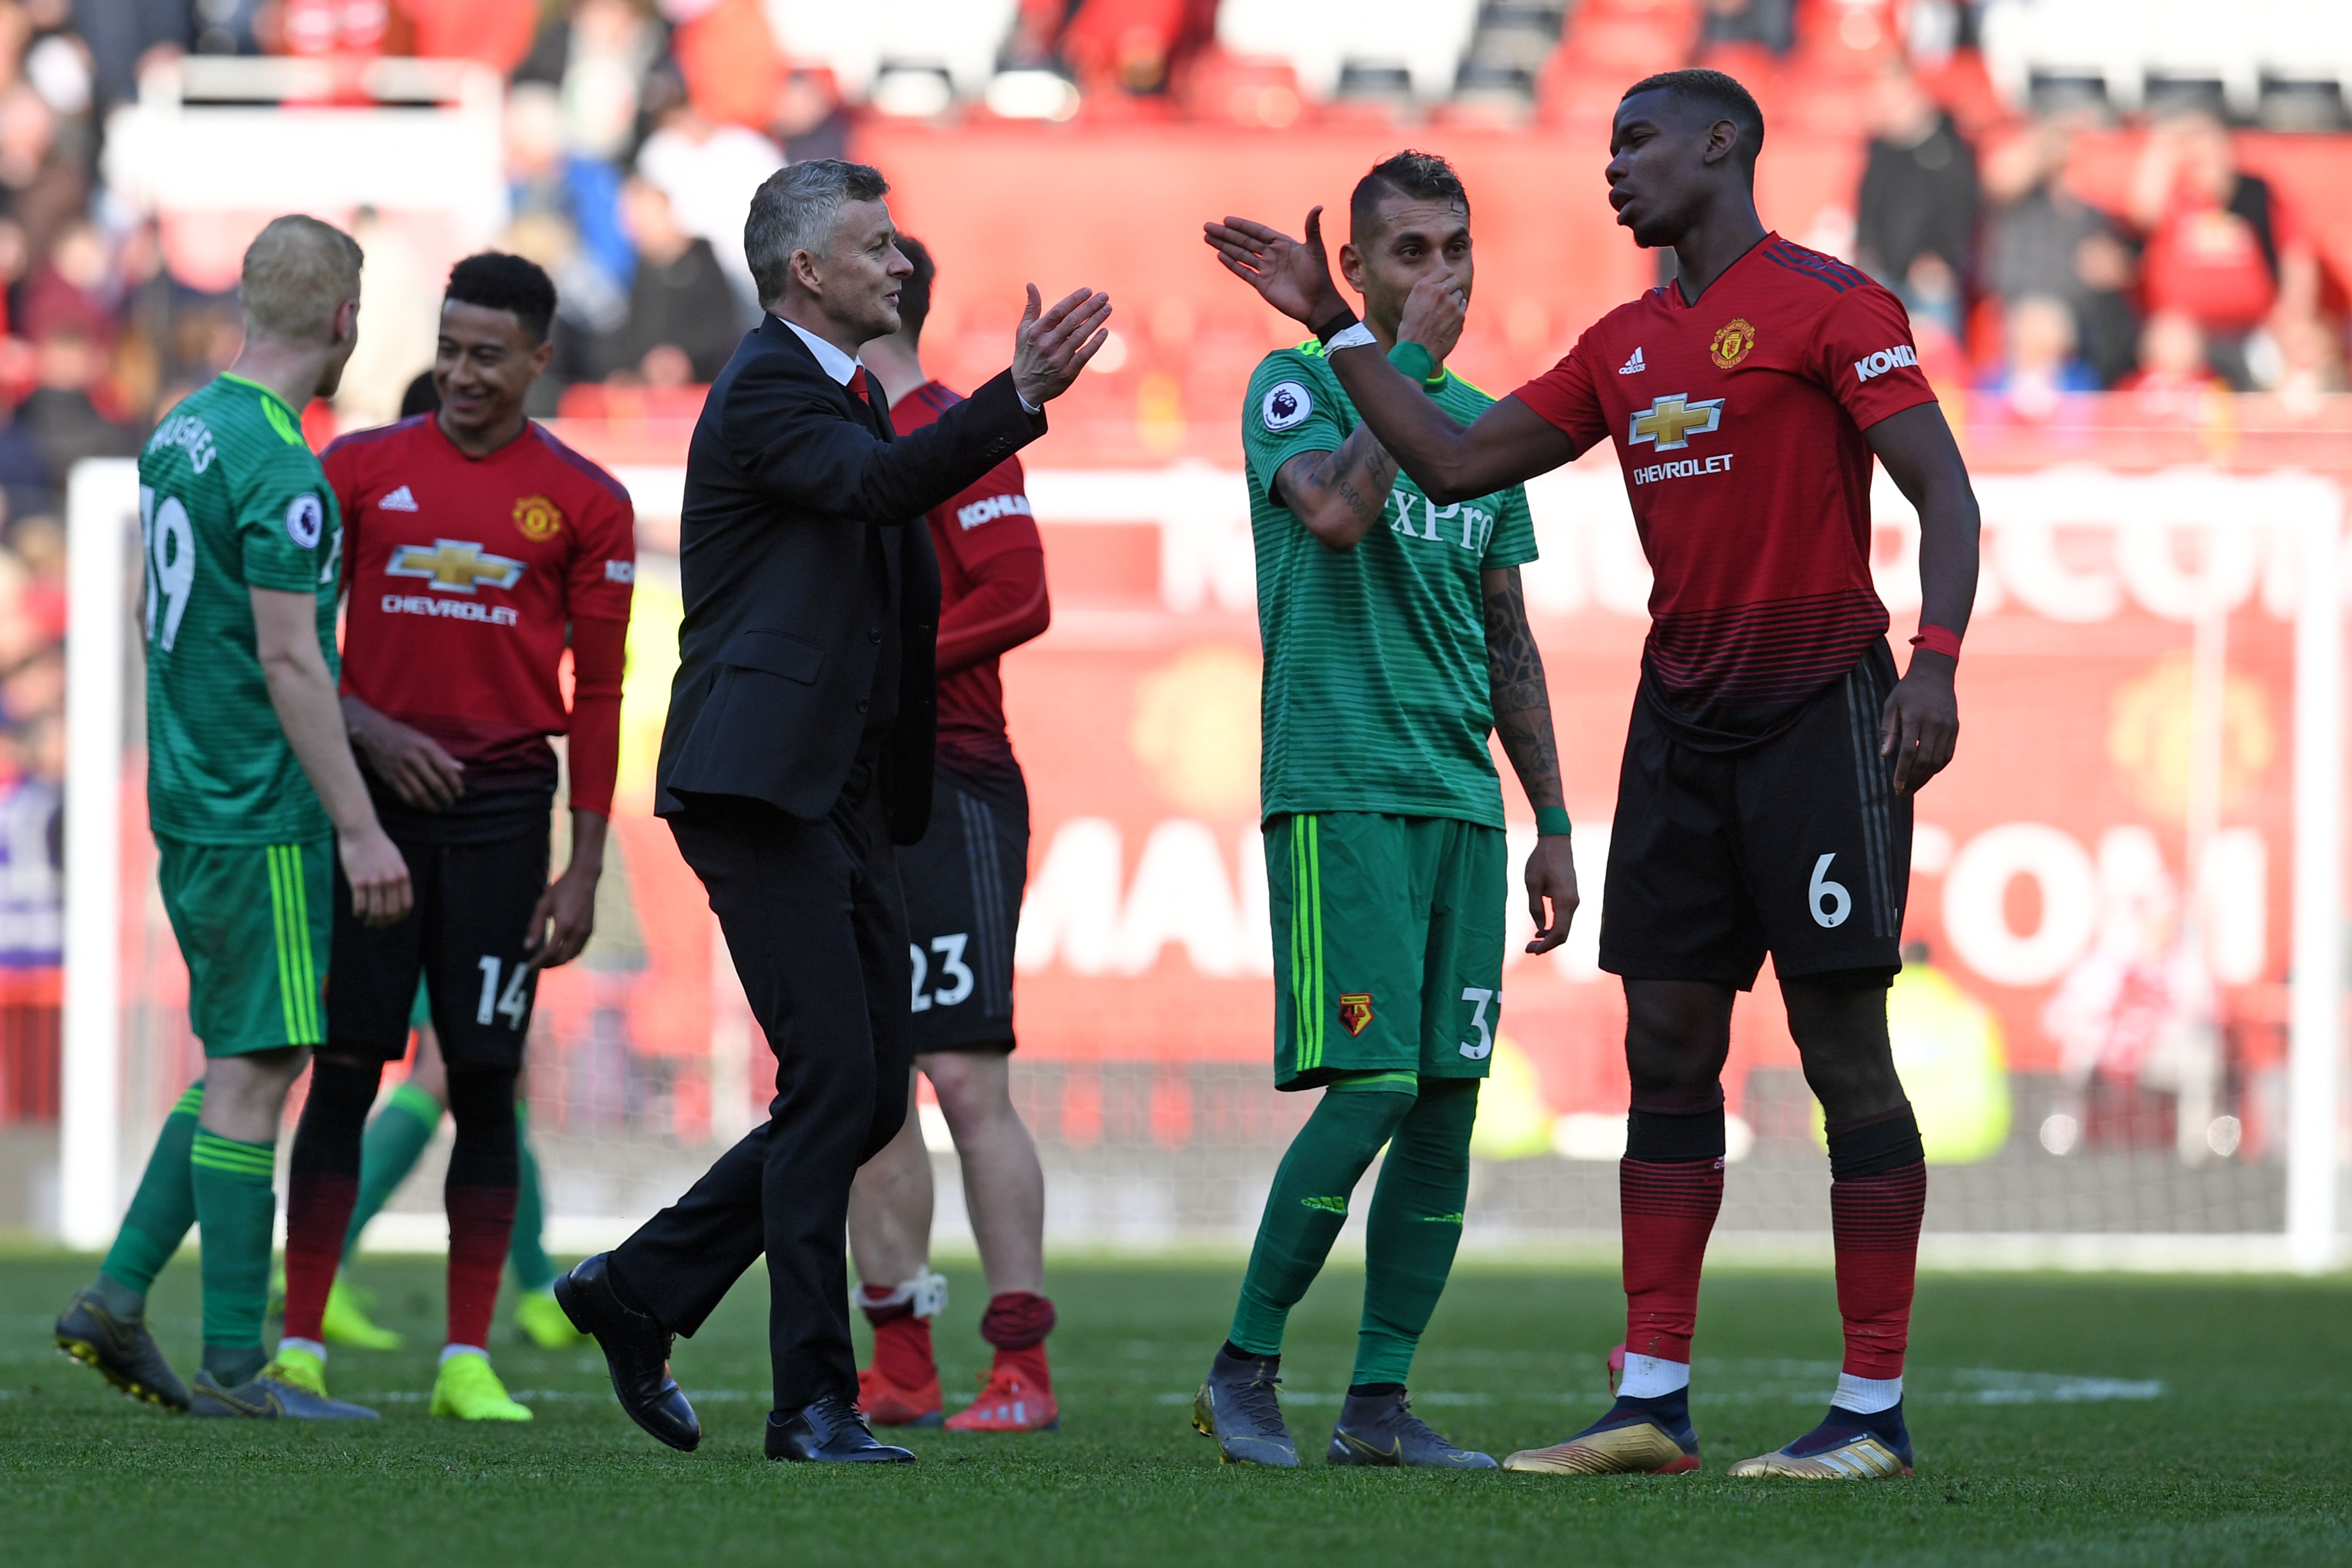 Manchester United's Norwegian manager Ole Gunnar Solskjaer (L) shakes hands with Manchester United's French midfielder Paul Pogba (R) after the final whistle of the English Premier League football match between Manchester United and Watford at Old Trafford in Manchester, north west England, on March 30, 2019. (Photo by Paul ELLIS / AFP) / RESTRICTED TO EDITORIAL USE. No use with unauthorized audio, video, data, fixture lists, club/league logos or 'live' services. Online in-match use limited to 120 images. An additional 40 images may be used in extra time. No video emulation. Social media in-match use limited to 120 images. An additional 40 images may be used in extra time. No use in betting publications, games or single club/league/player publications. /         (Photo credit should read PAUL ELLIS/AFP/Getty Images)